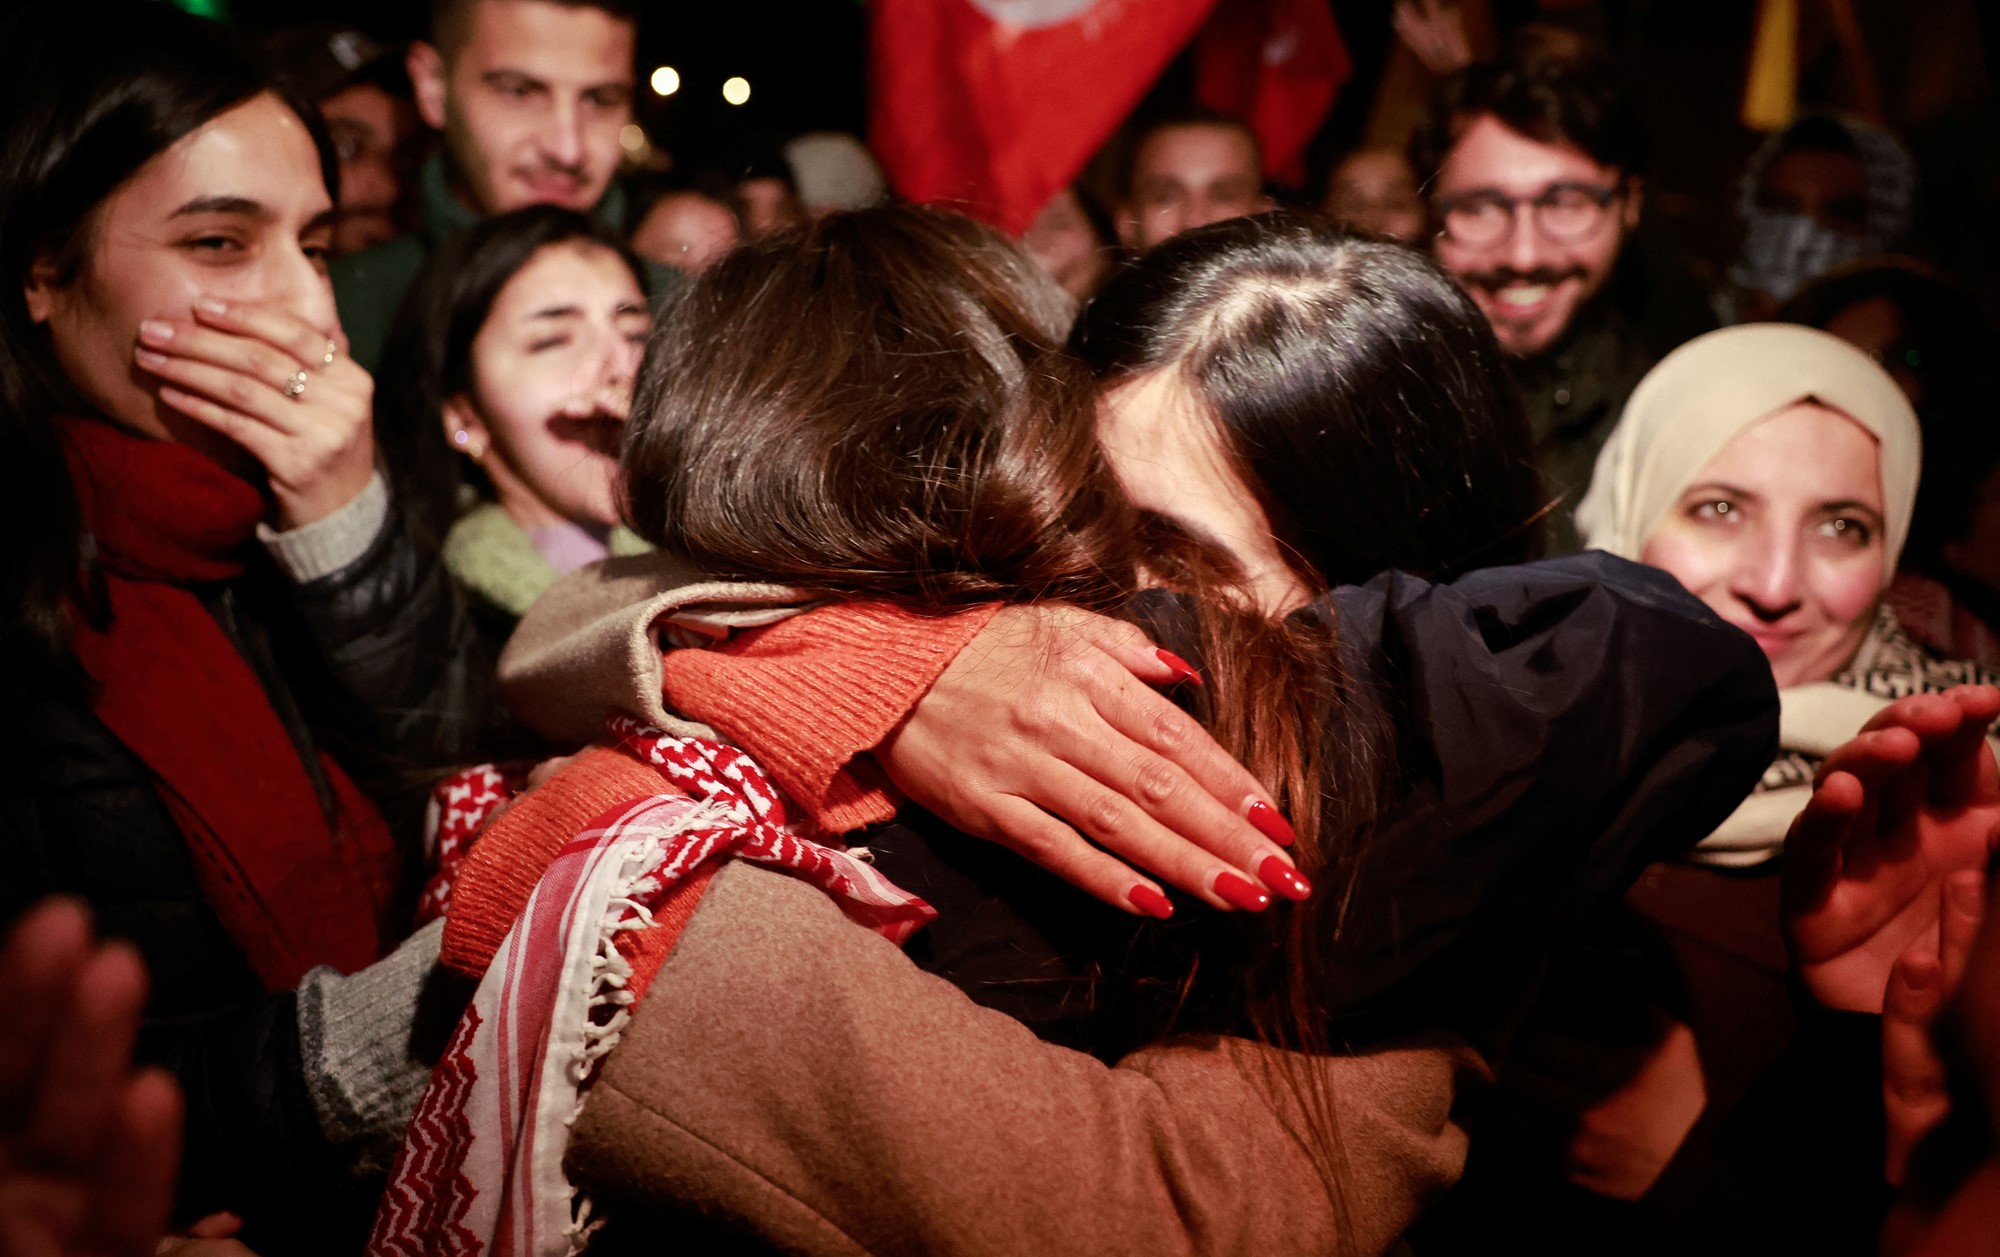 A close up of two women embracing, among a crowd of other people celebrating and smiling